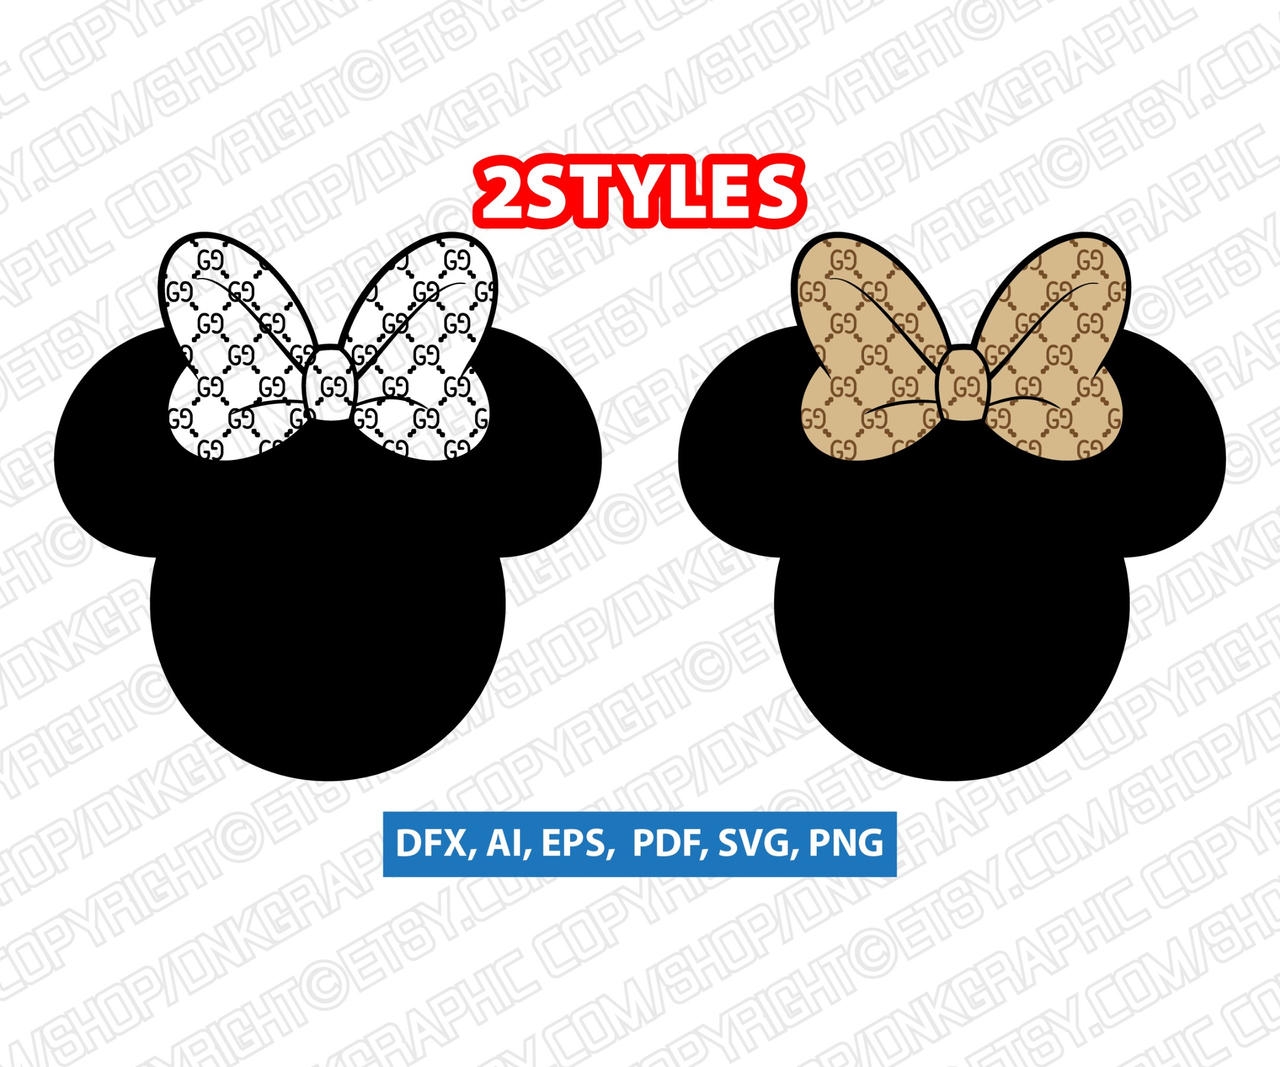 Minnie Mouse Gucci Style logo vector. Download free Minnie Mouse Gucci  Style vector logo and icons i…